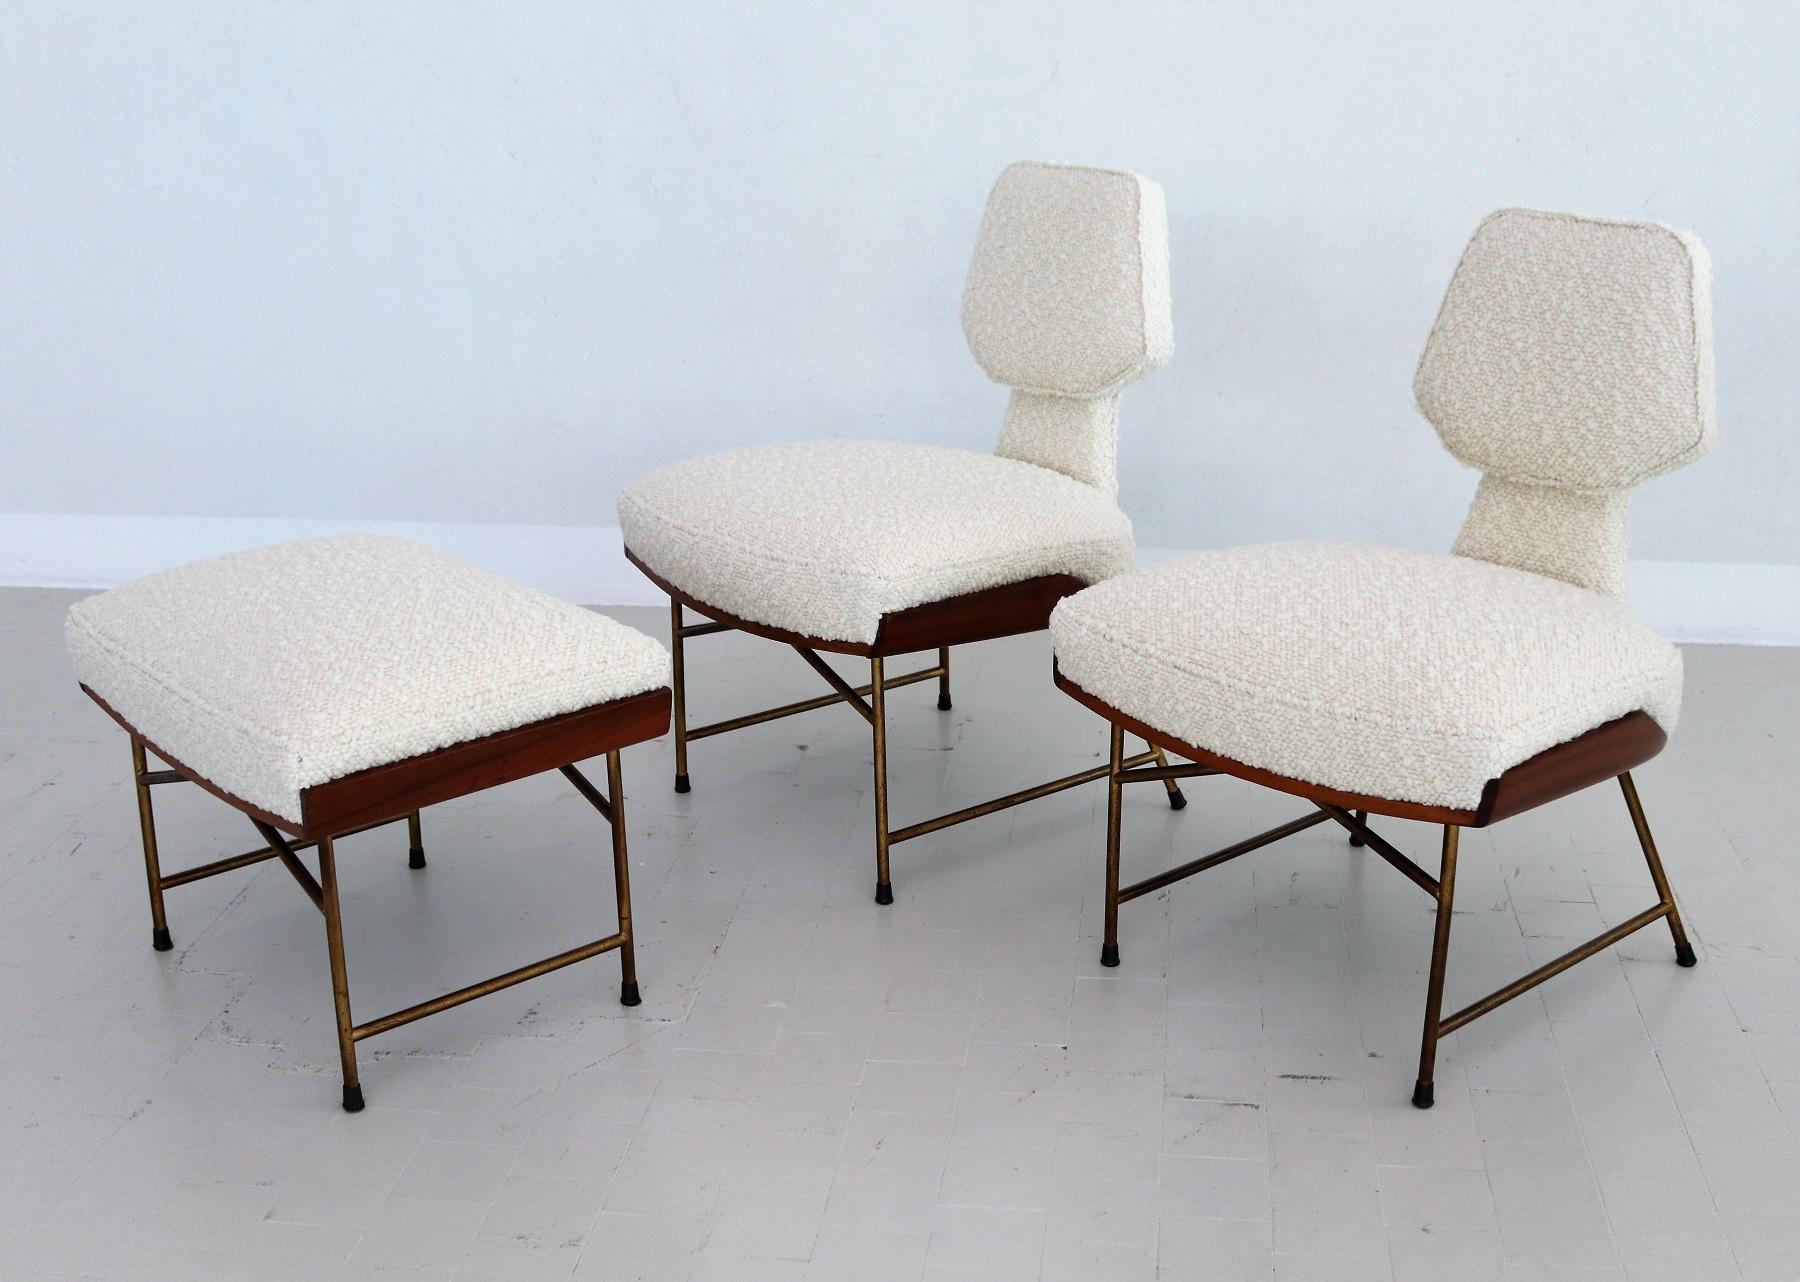 Italian Set of Side Chairs with Footstool in Wood and Bouclé, 1950 For Sale 3